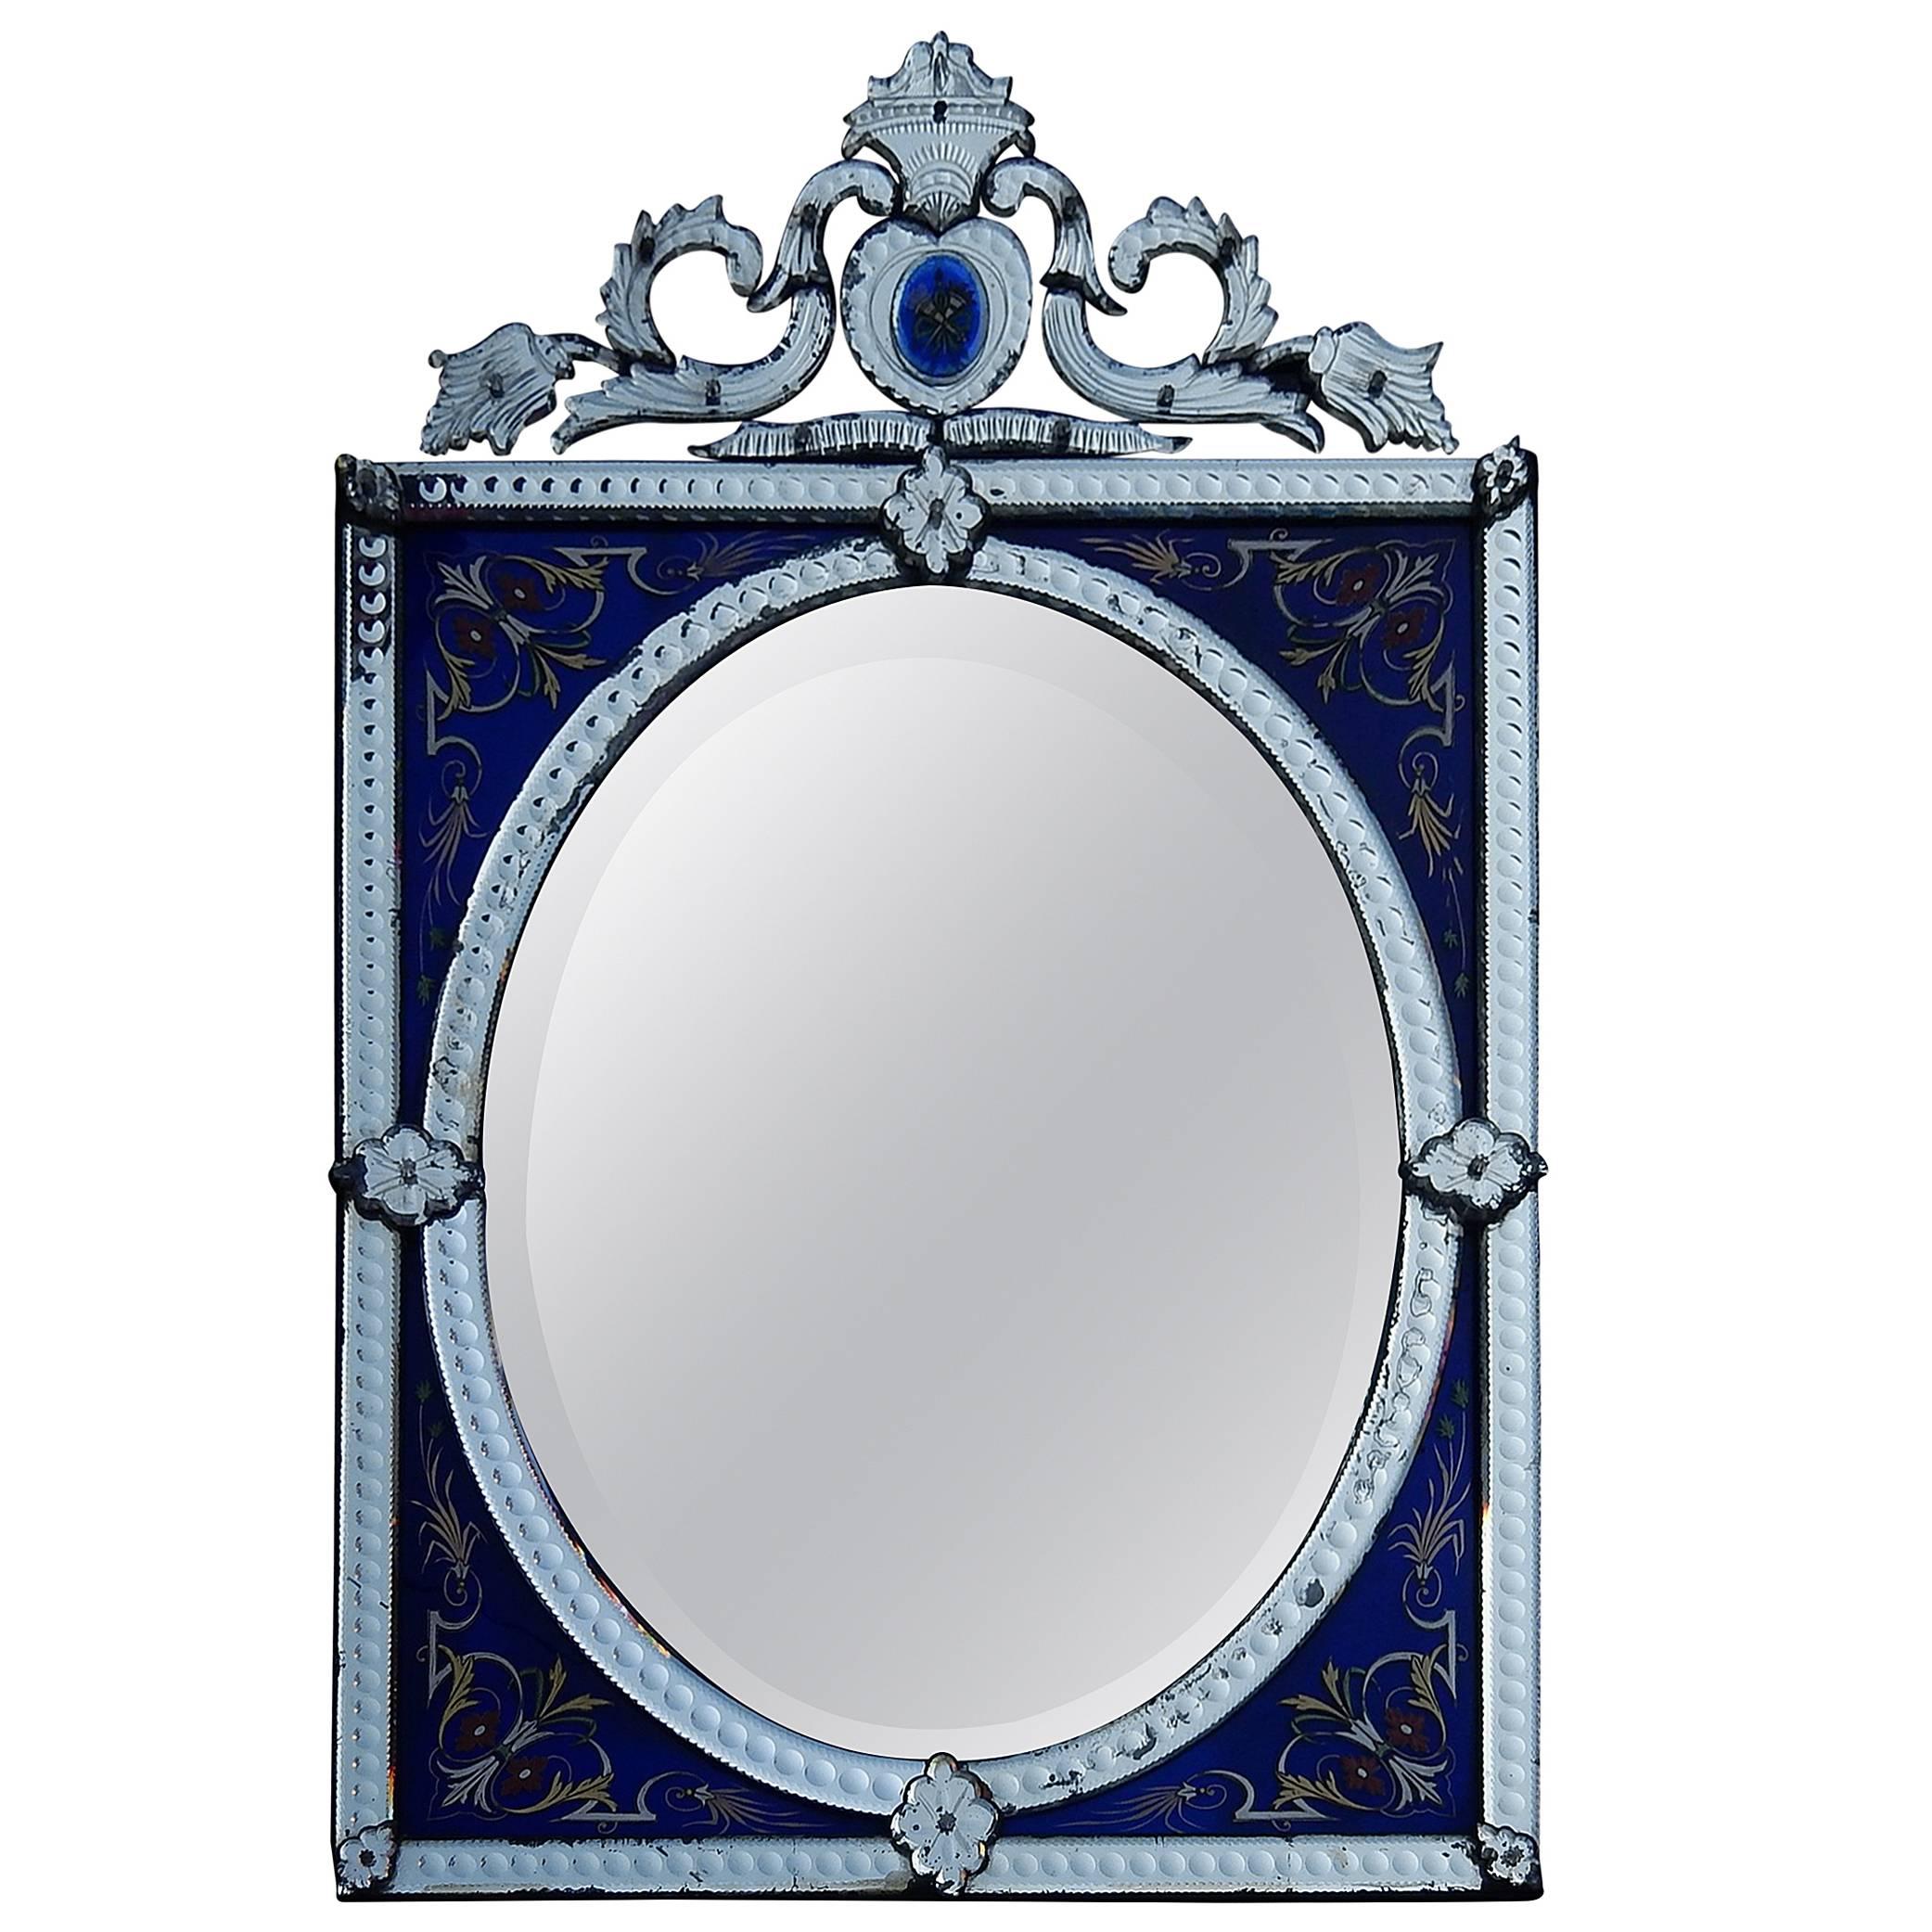 1880-1900 Venetian Mirror with Pediment Blue Glass Adorned with Flowers